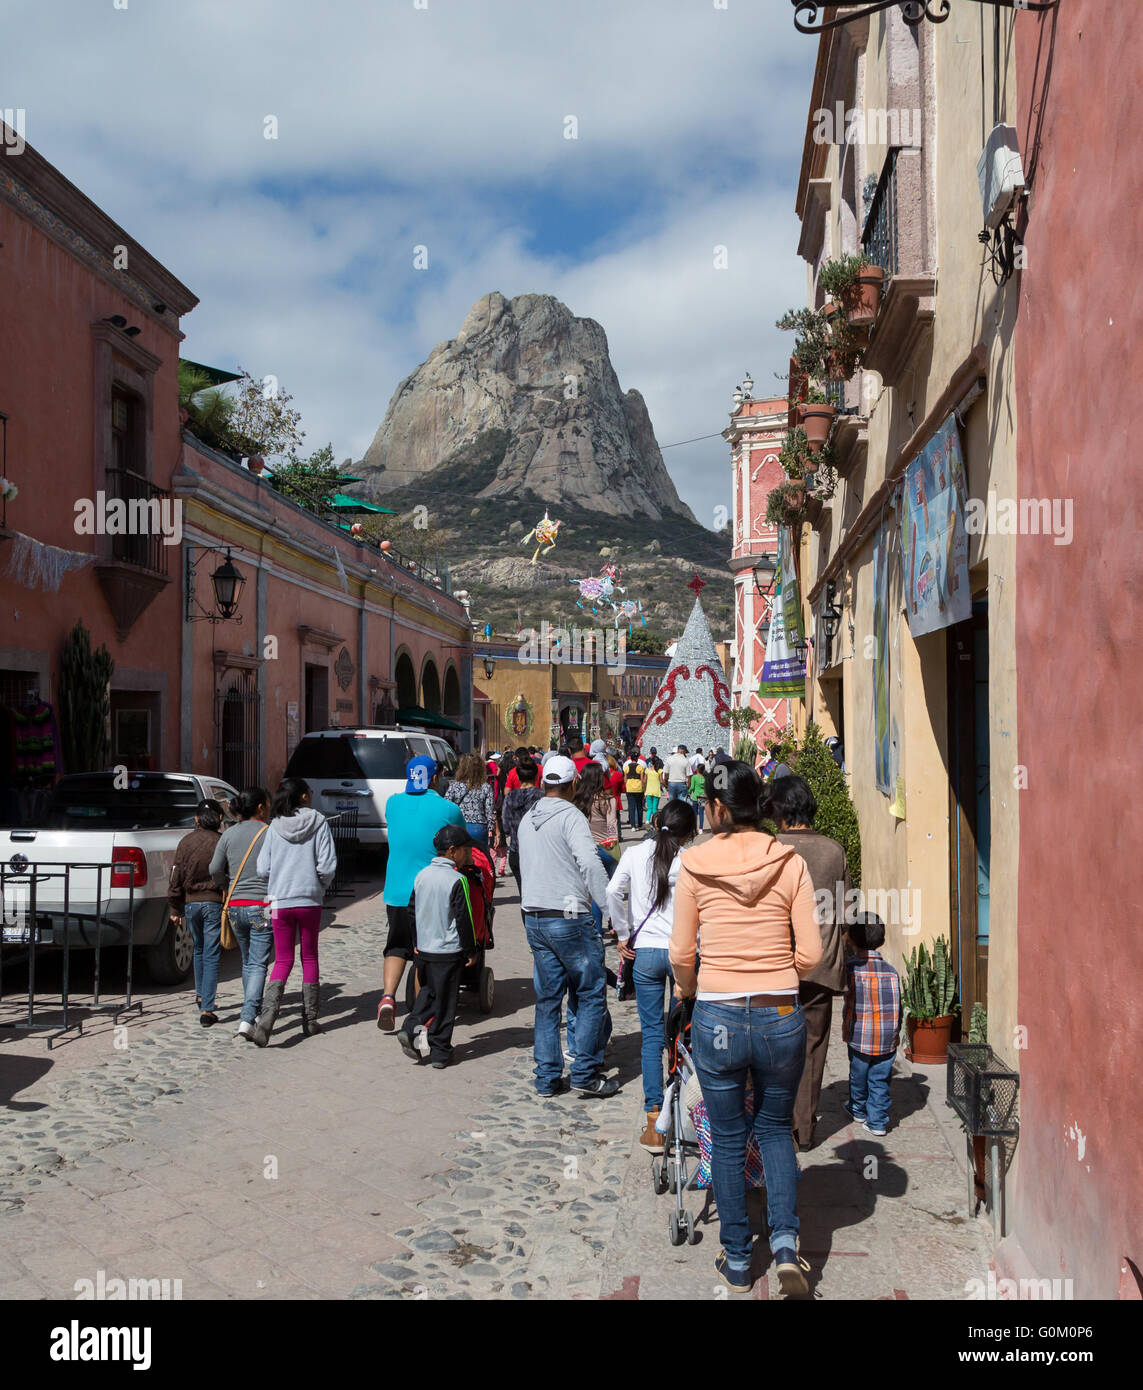 Tourists near Pena de Bernal, a large monolith standing 350 meters, is found in Pueblito Magico of Bernal, Queretaro, Mexico Stock Photo